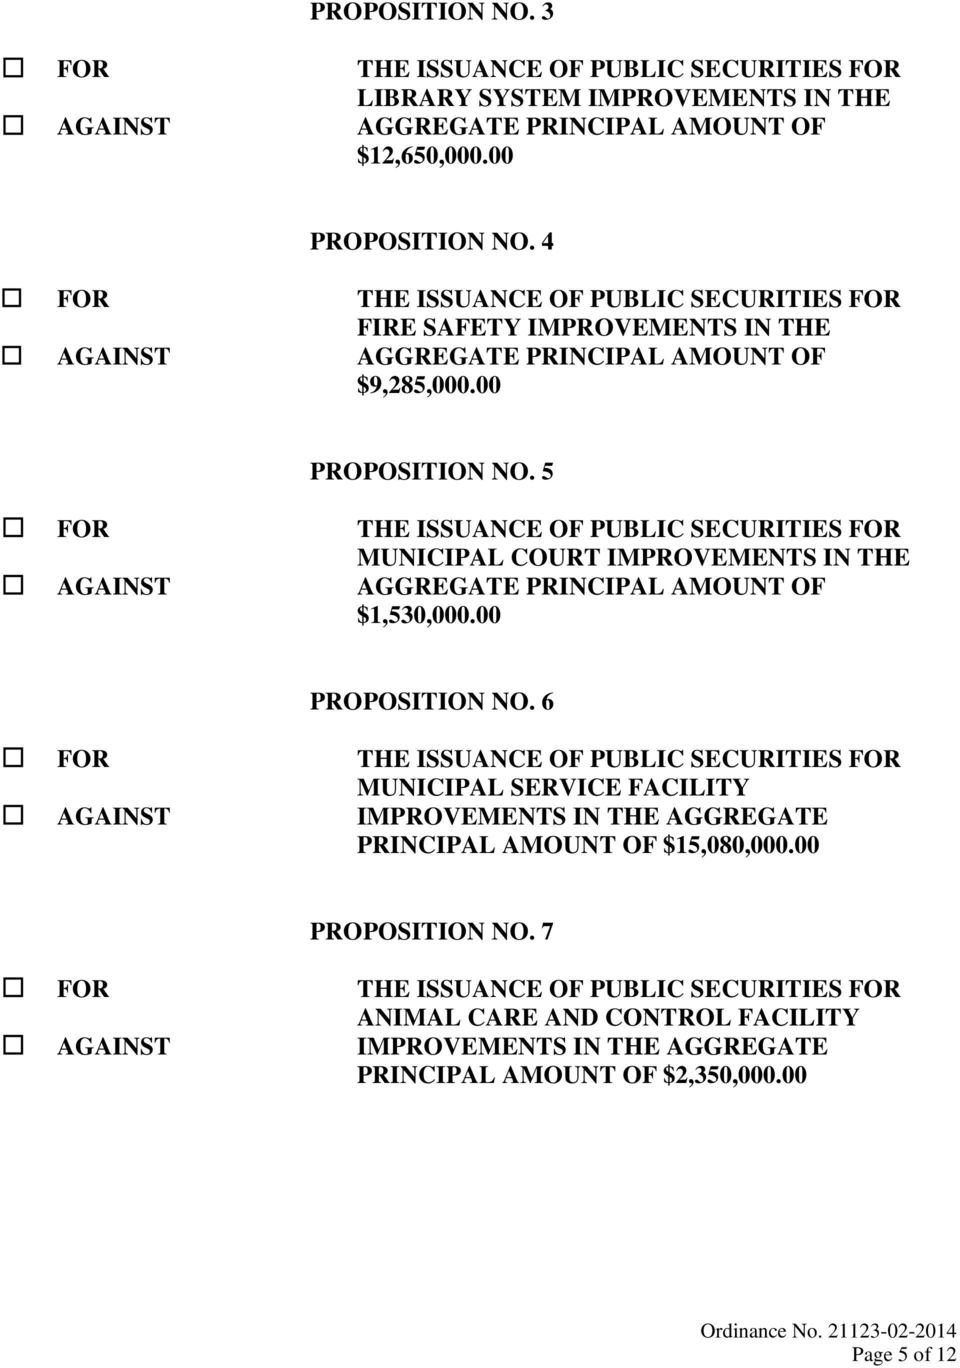 5 FOR THE ISSUANCE OF PUBLIC SECURITIES FOR MUNICIPAL COURT IMPROVEMENTS IN THE AGAINST AGGREGATE PRINCIPAL AMOUNT OF $1,530,000.00 PROPOSITION NO.